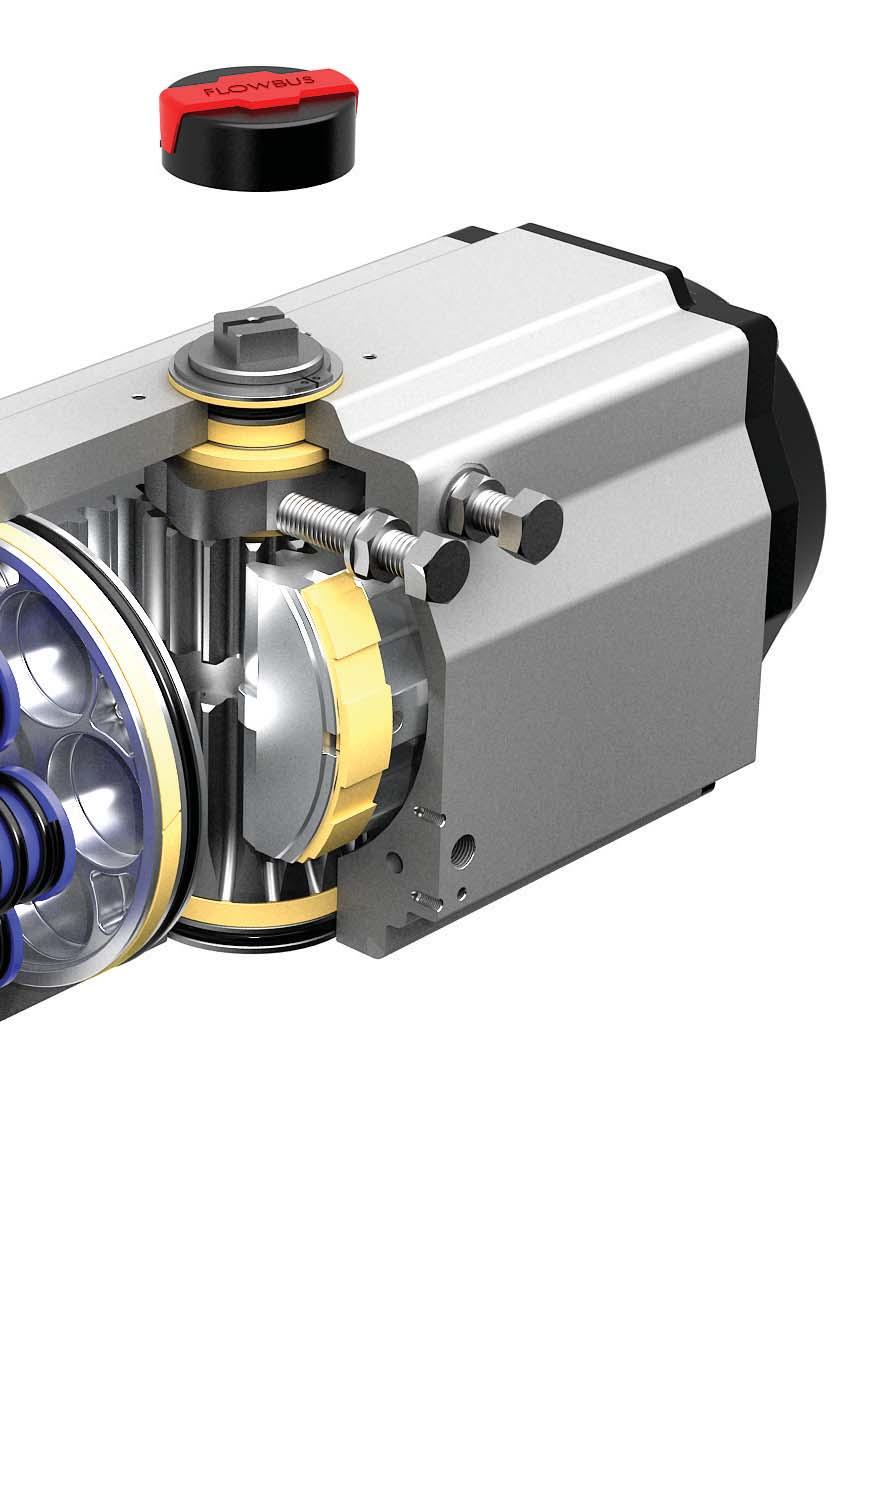 _ISO 52 Valve Interface The R-type actuator has valve mounting pads in accordance with ISO52 standard, providing standardized mounting for ISO compatible quarter-turn valves.